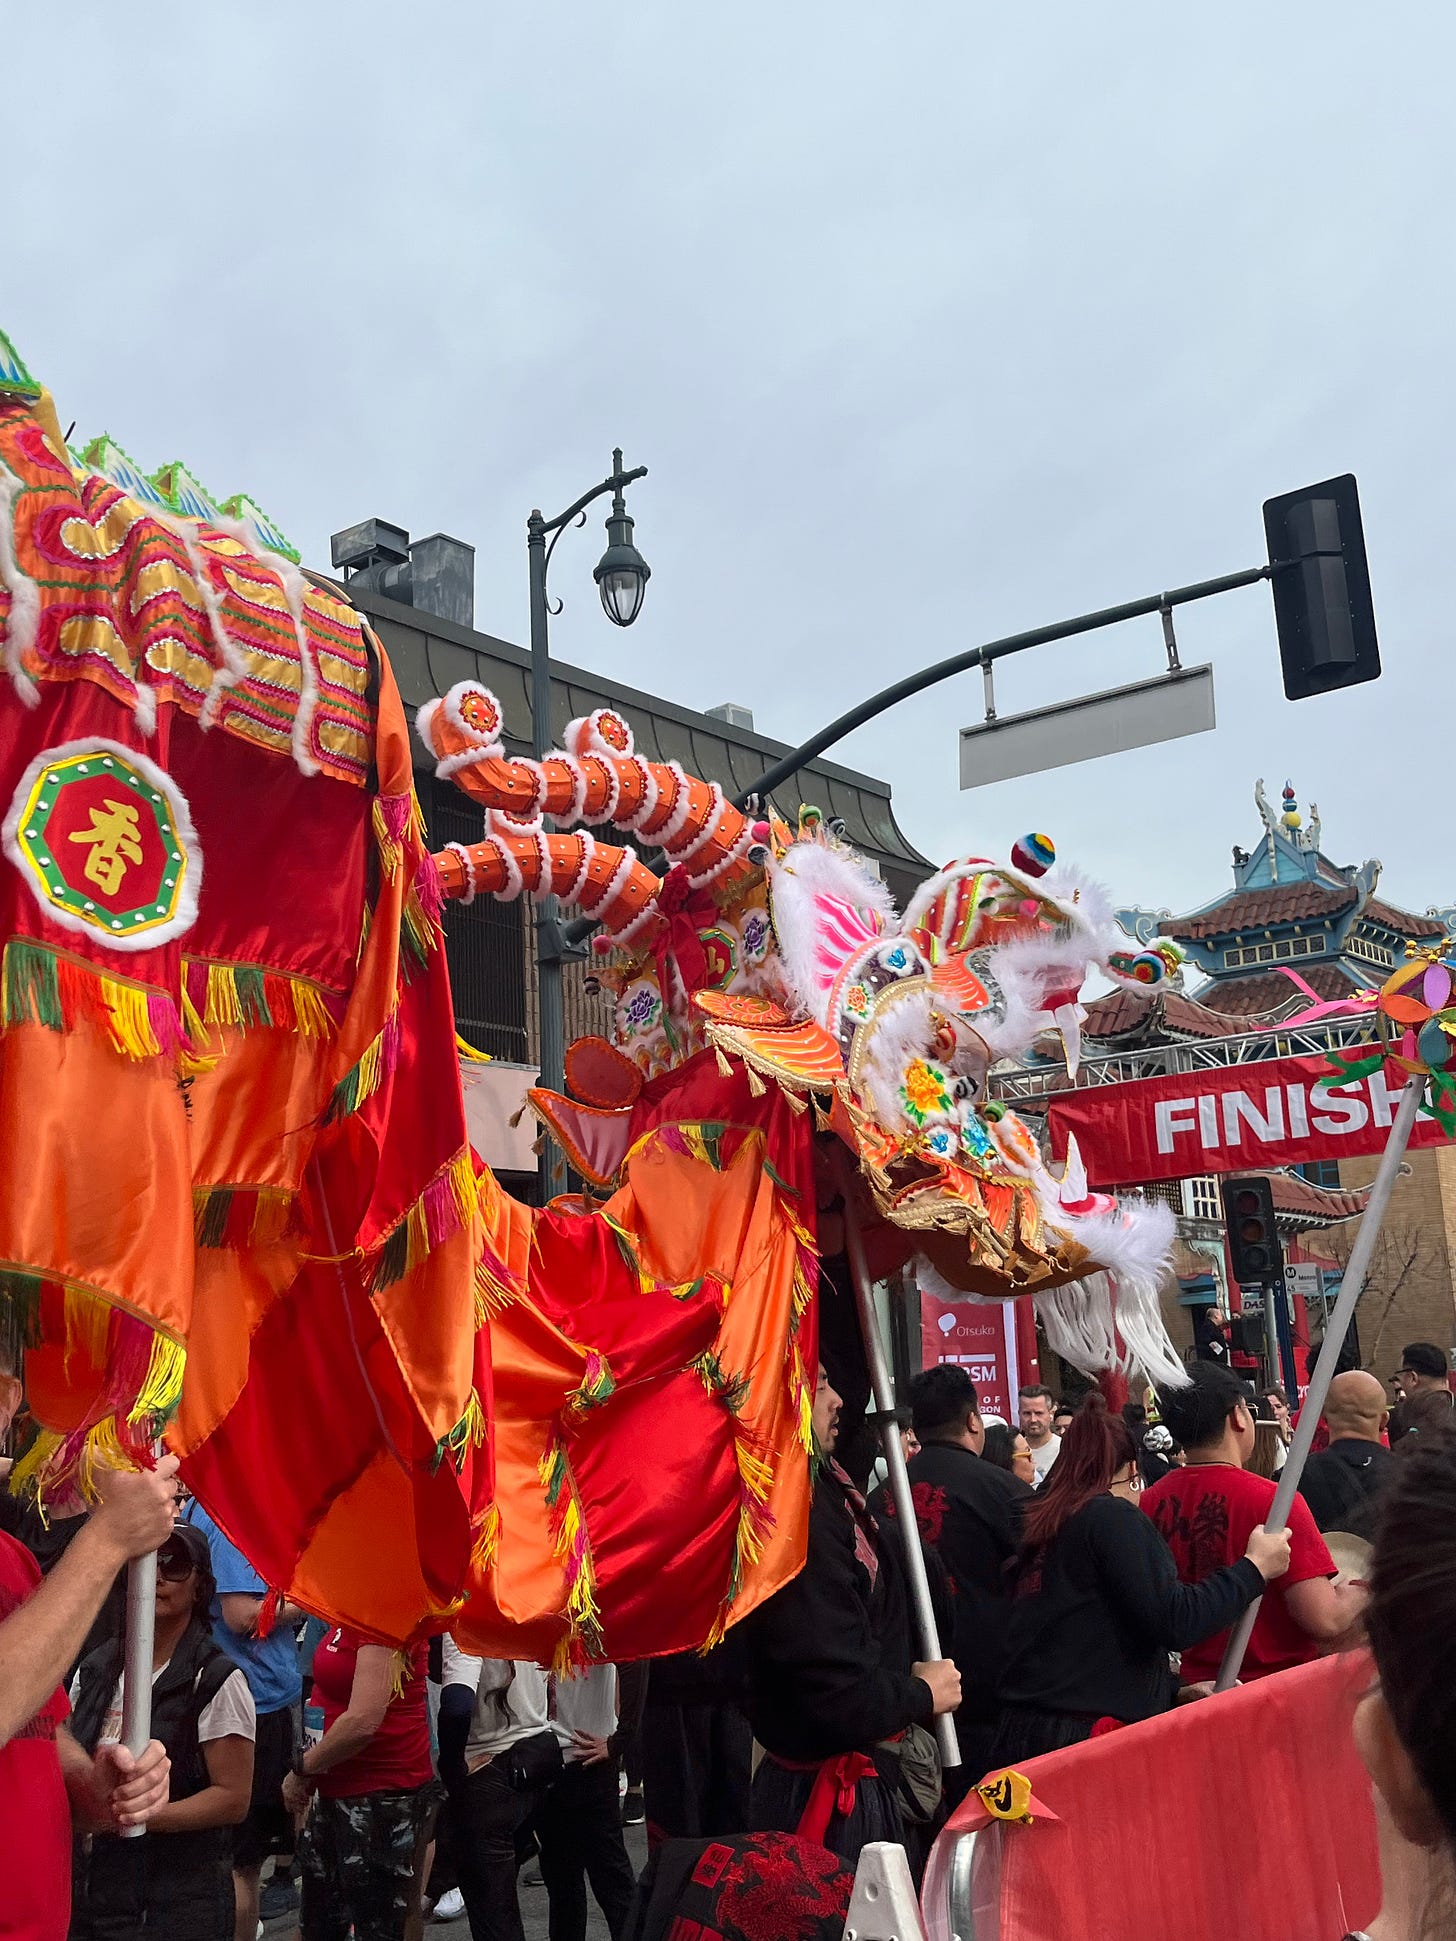 A dragon dancer at the finish line of a race.